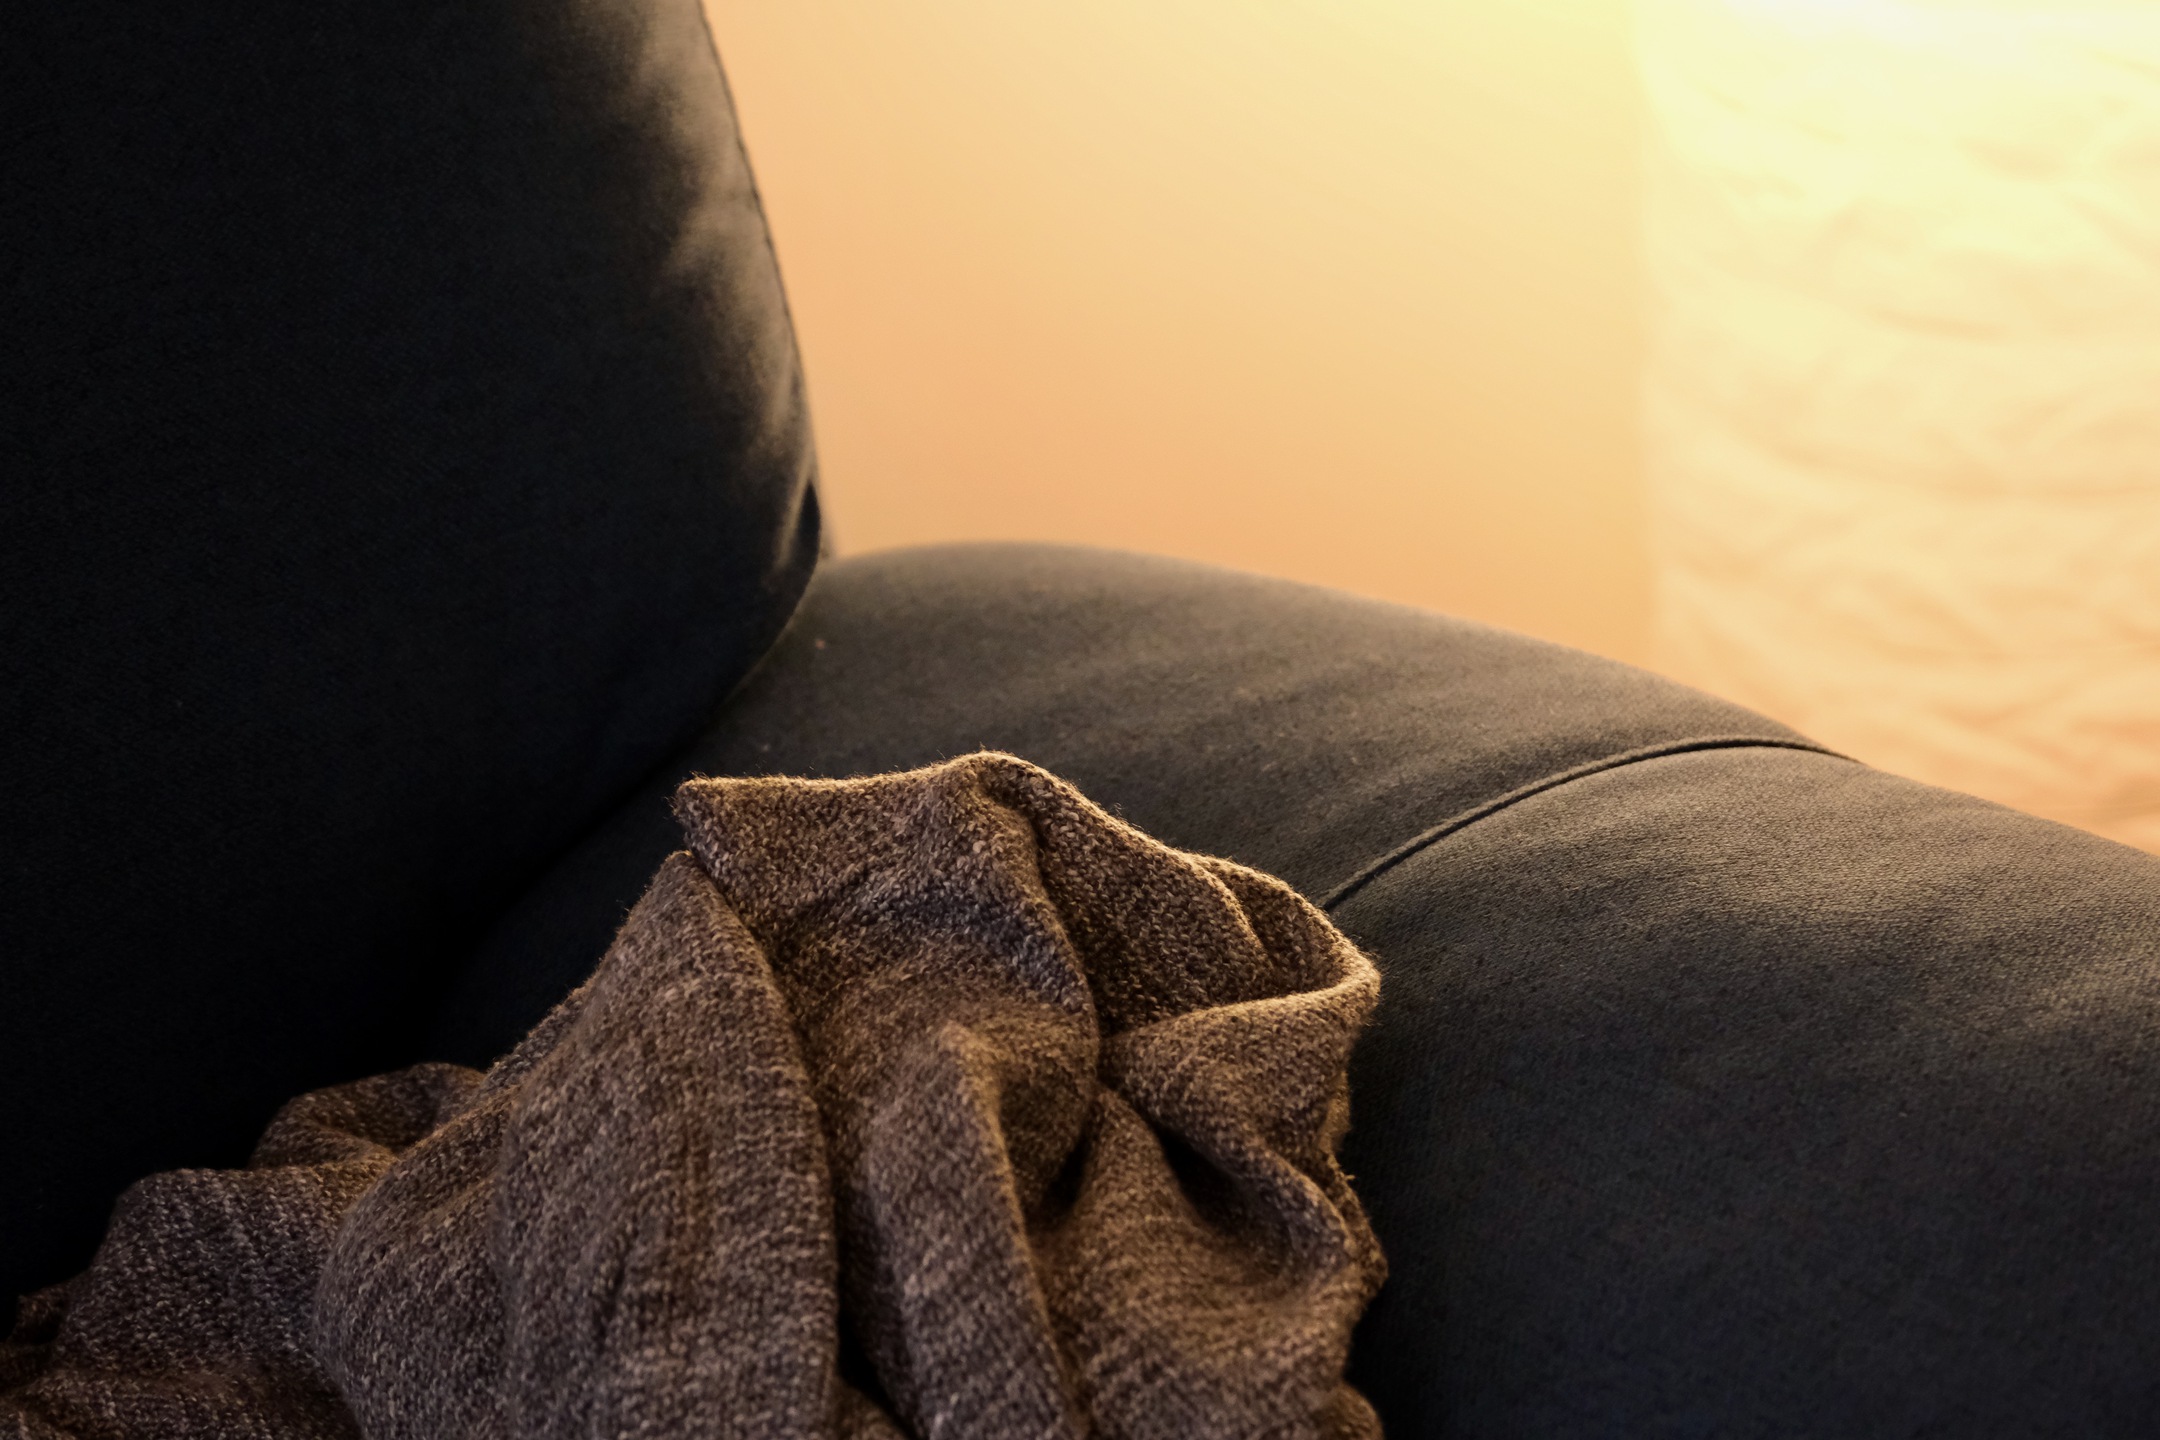 A close up shot of a dark blue fabric couch with a gray throw blanket. There is a warm source of light behind the couch.